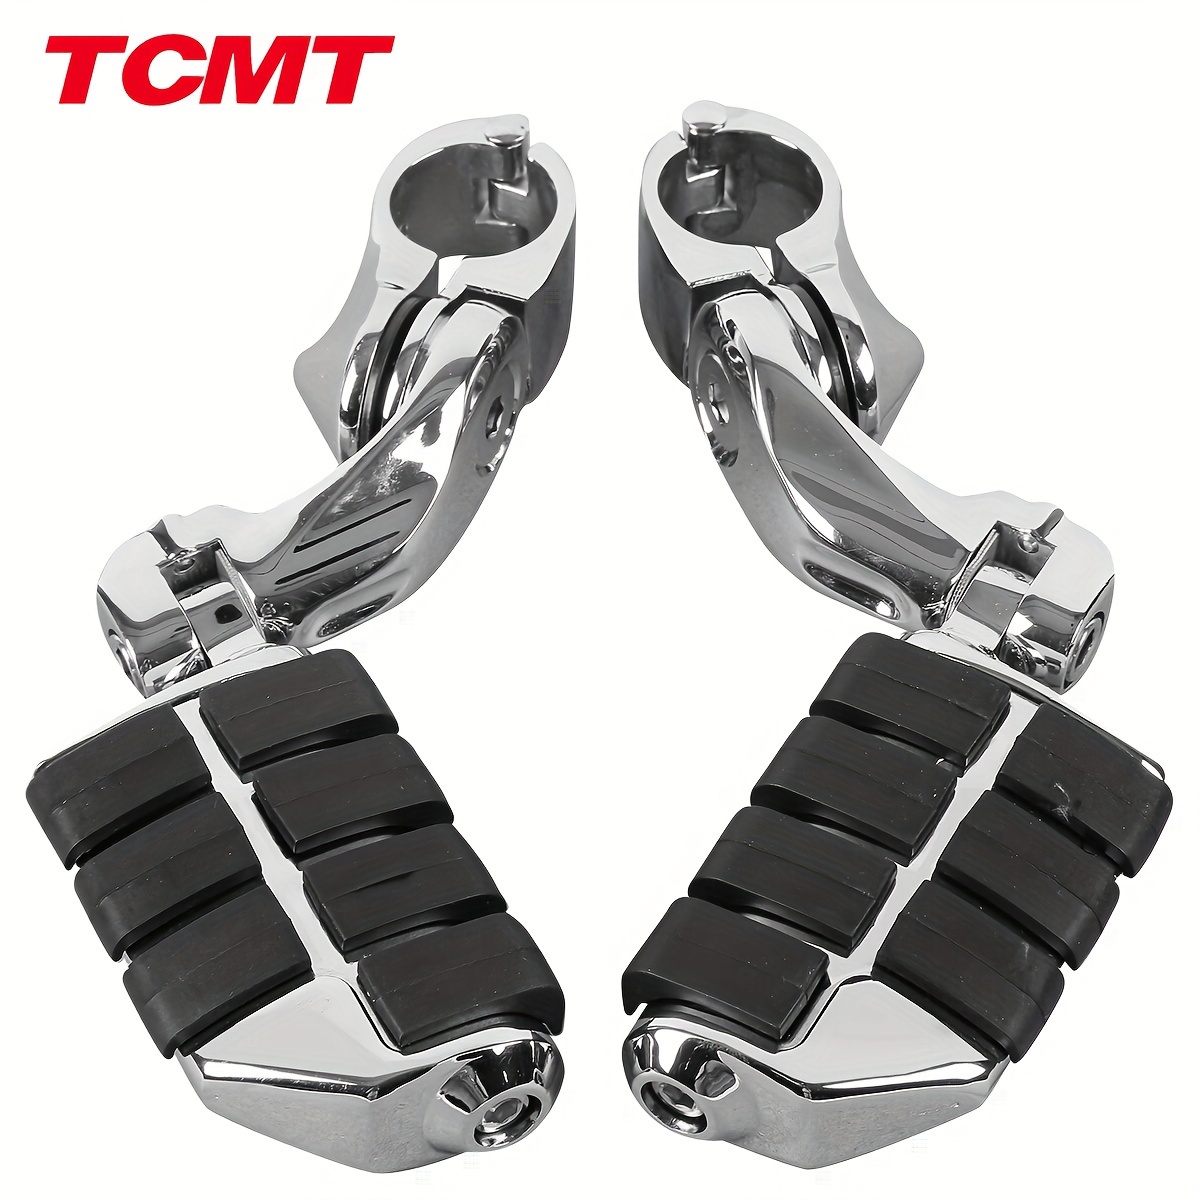 

Tcmt 1 1/4" Engine Guard Highway Foot Pegs Footrest + Short Angled Clamps Fit For Harley Touring Road Street Glide